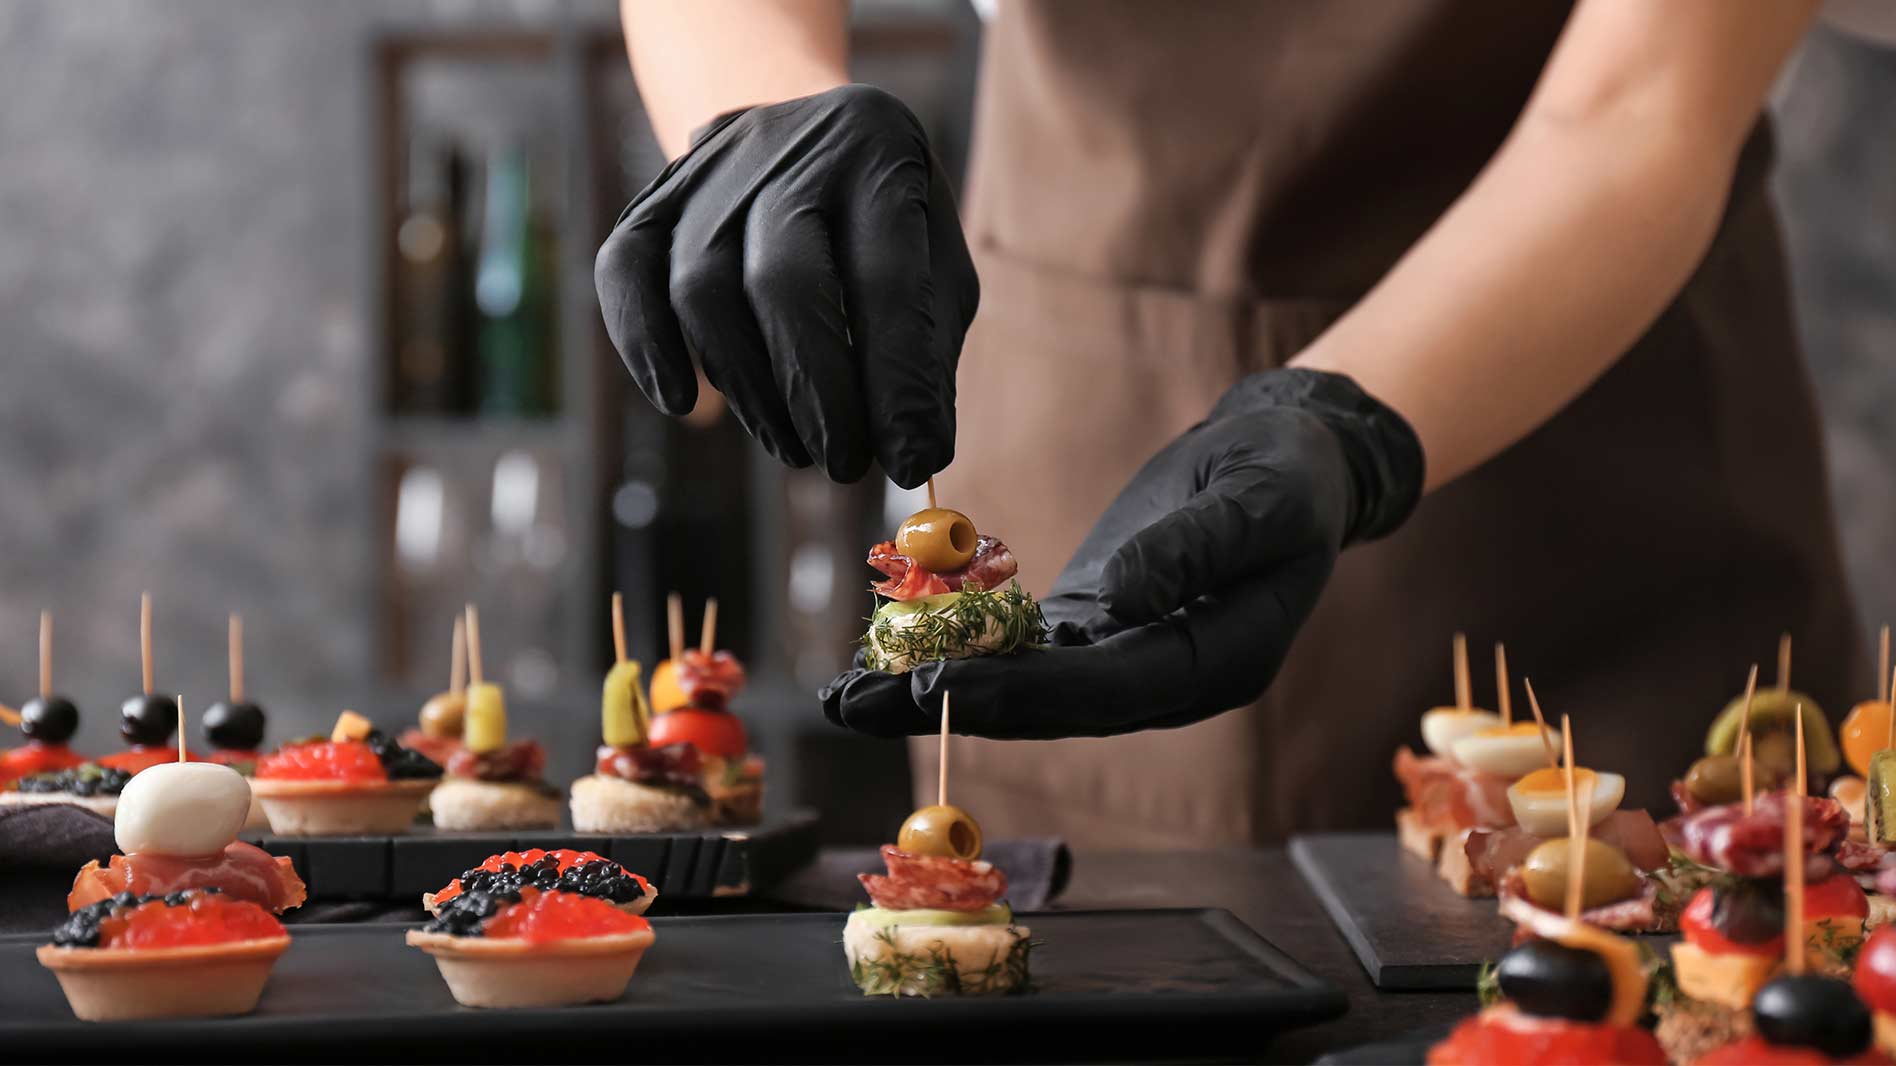 5 Finger Food Options To Have on Your Catering Menu for Summer